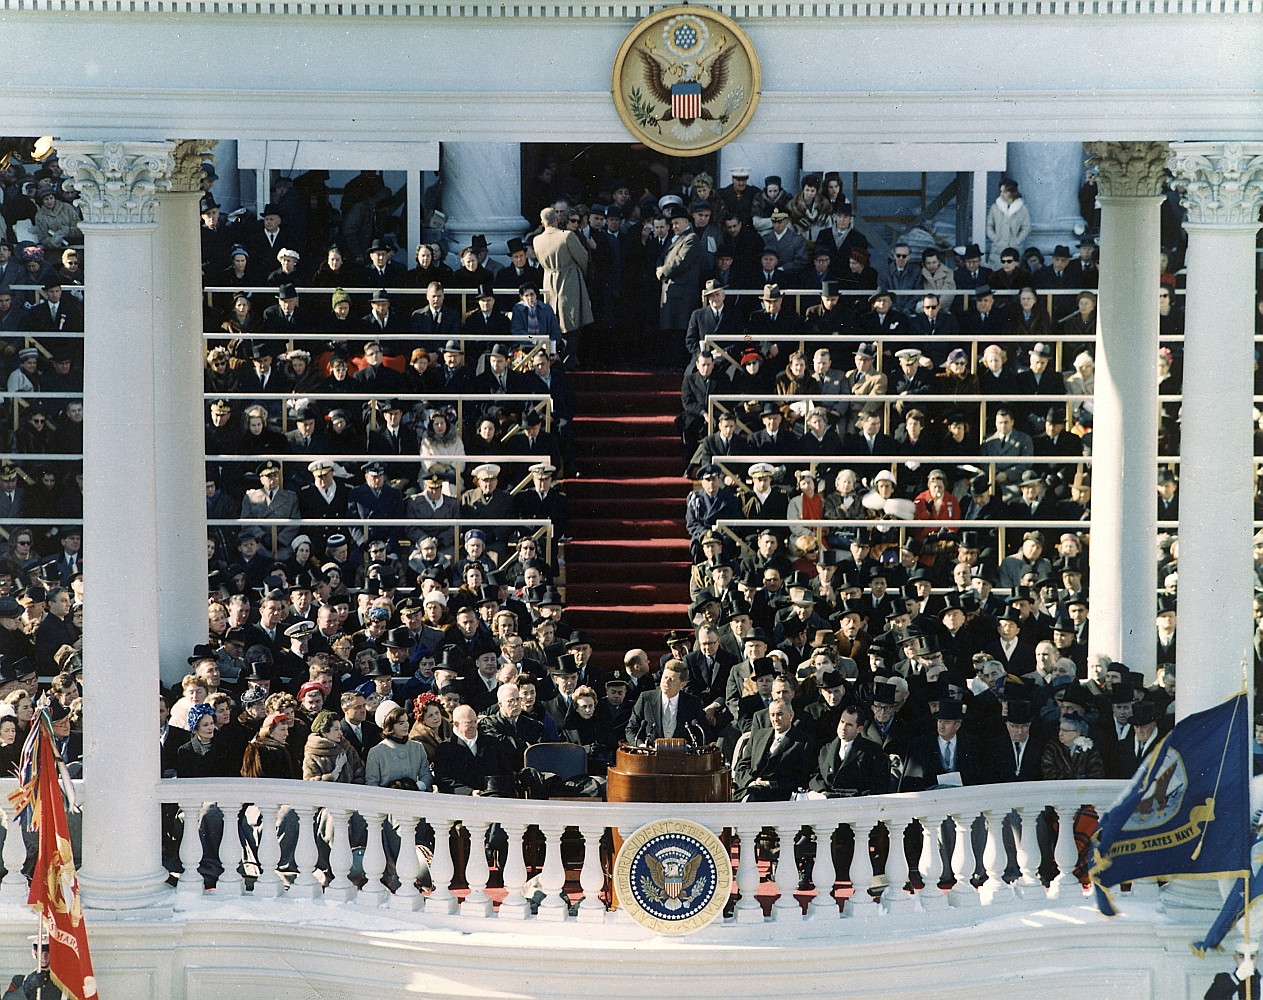 Inaugural Address of John F. Kennedy, 35th President of the United States. Washington, DC 20 January 1961. Please credit "U. S. Army Signal Corps photograph in the John Fitzgerald Kennedy Library, Boston".